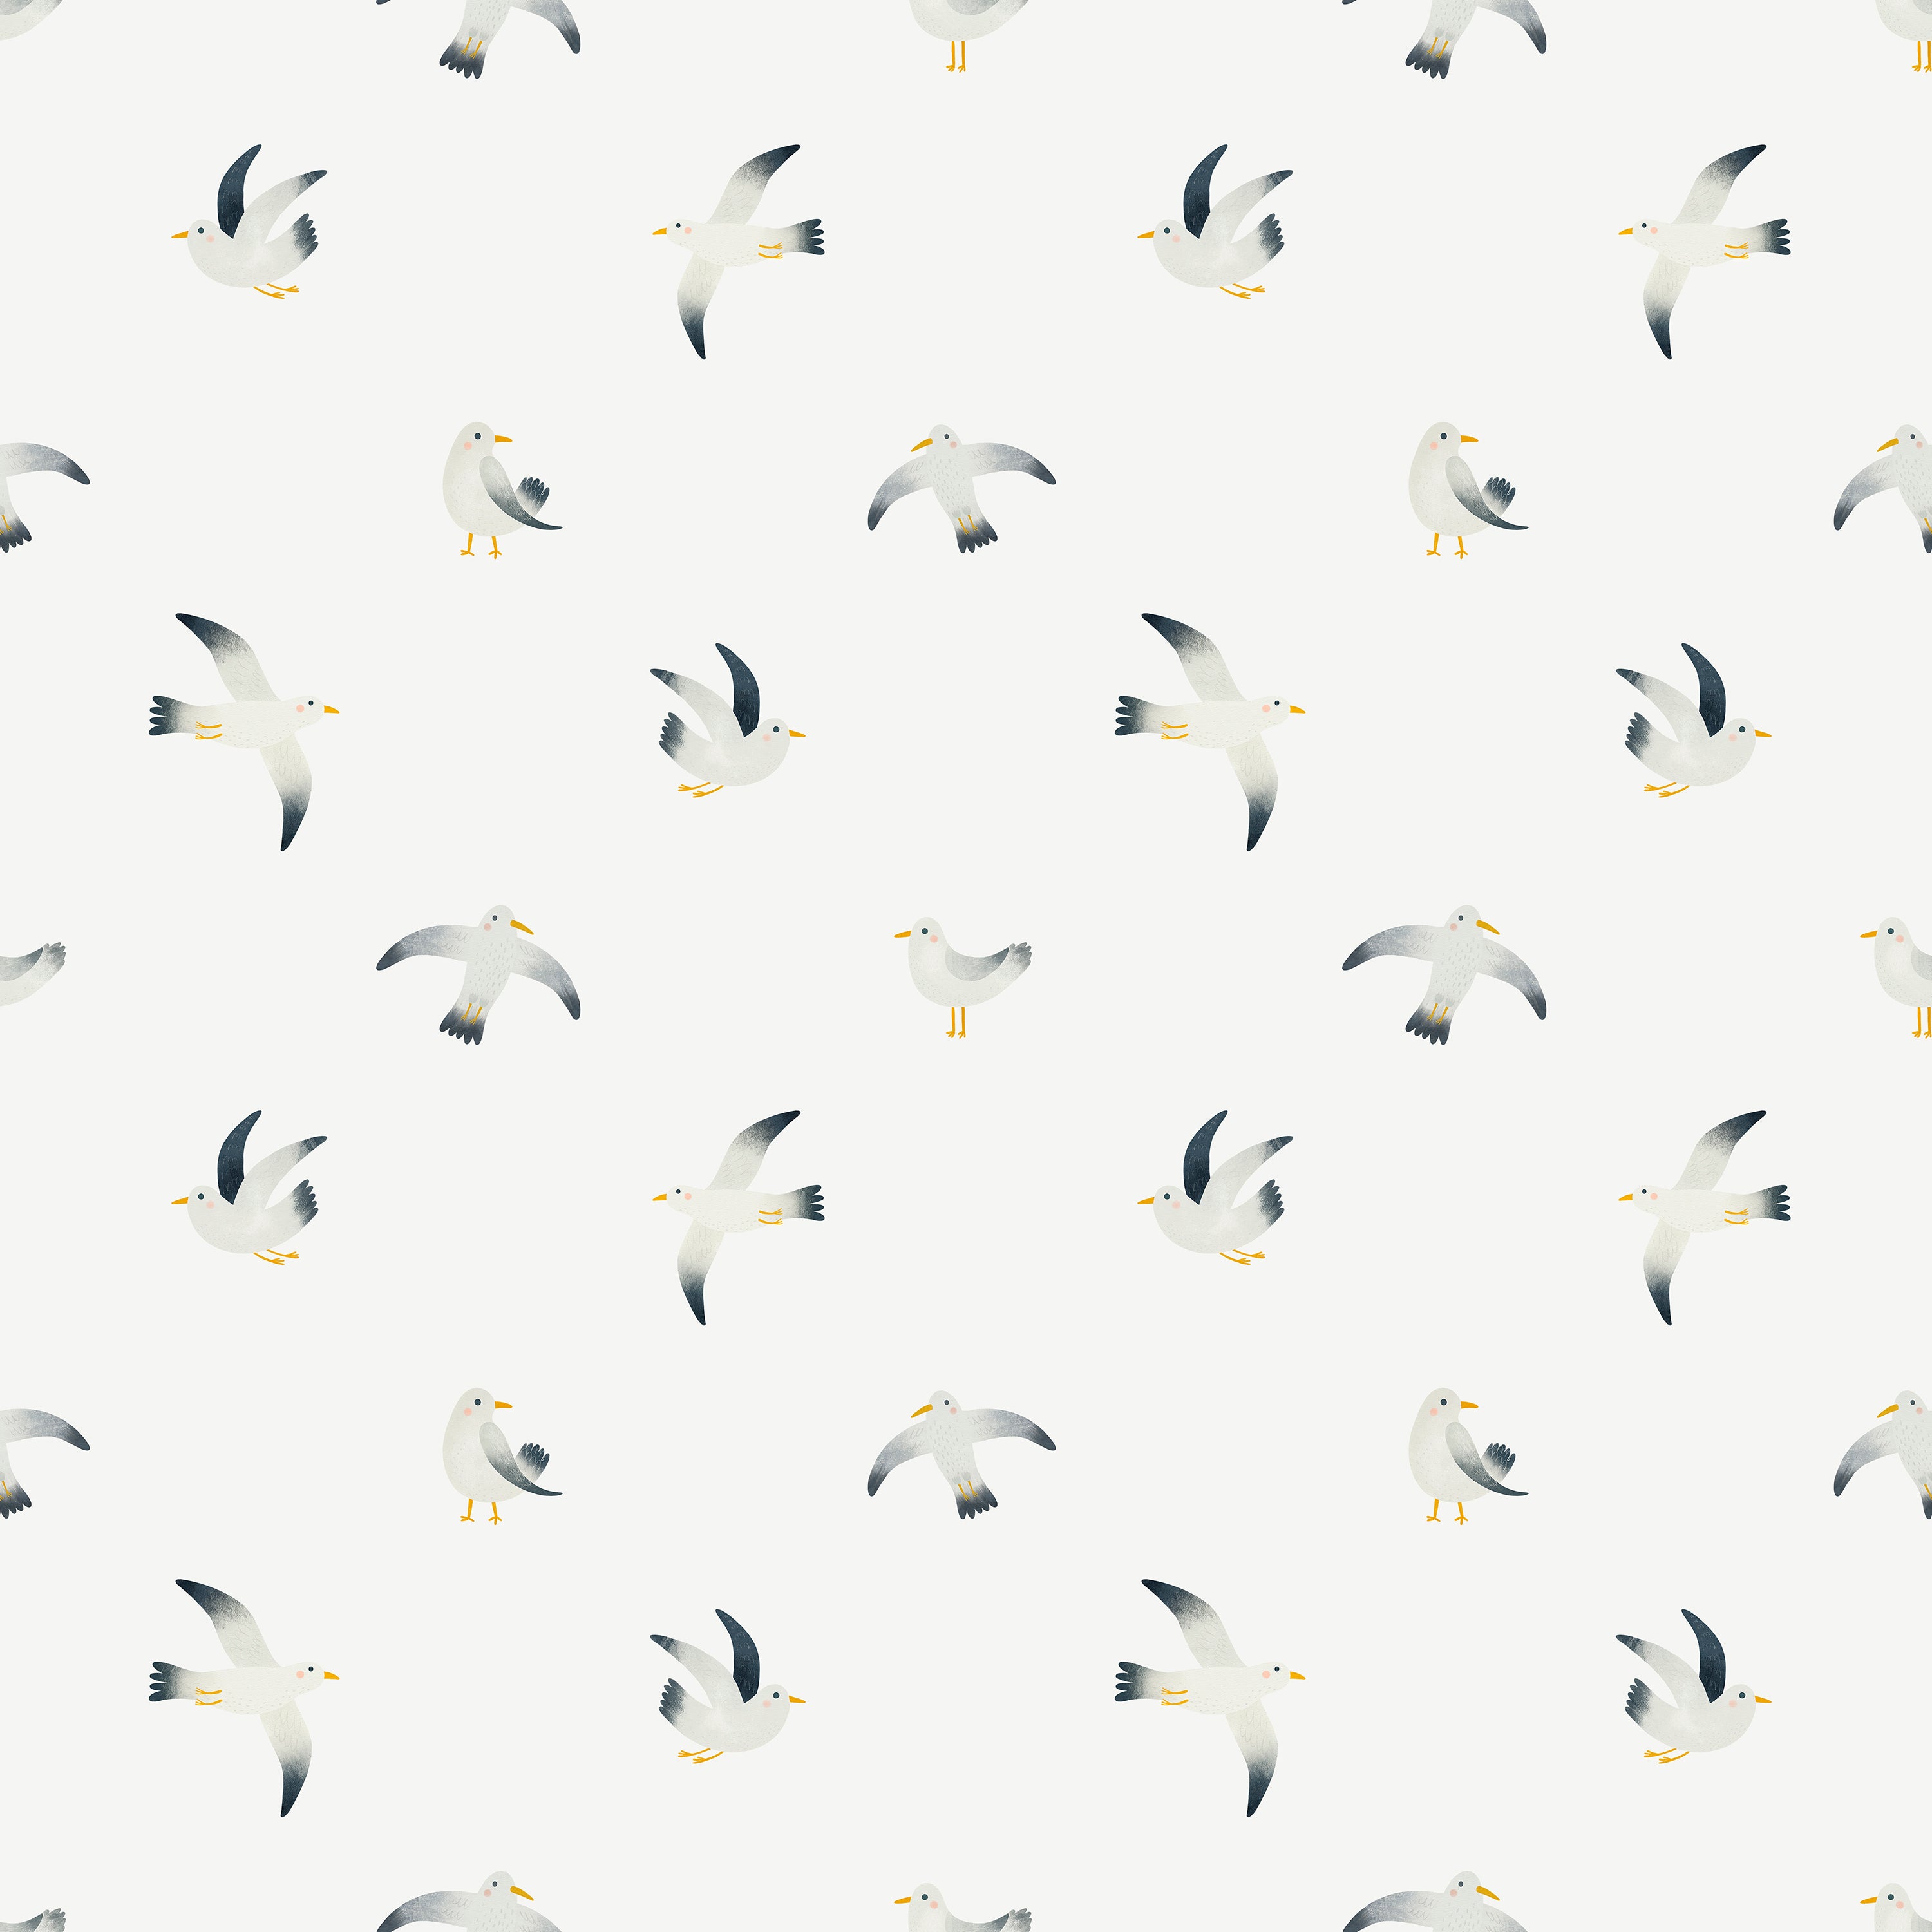 Close-up view of the Birds By the Sea Wallpaper, displaying a charming pattern of seagulls in various poses of flight. The background is a soft white, with the birds detailed in gray, black, and yellow, conveying a sense of freedom and seaside atmosphere.